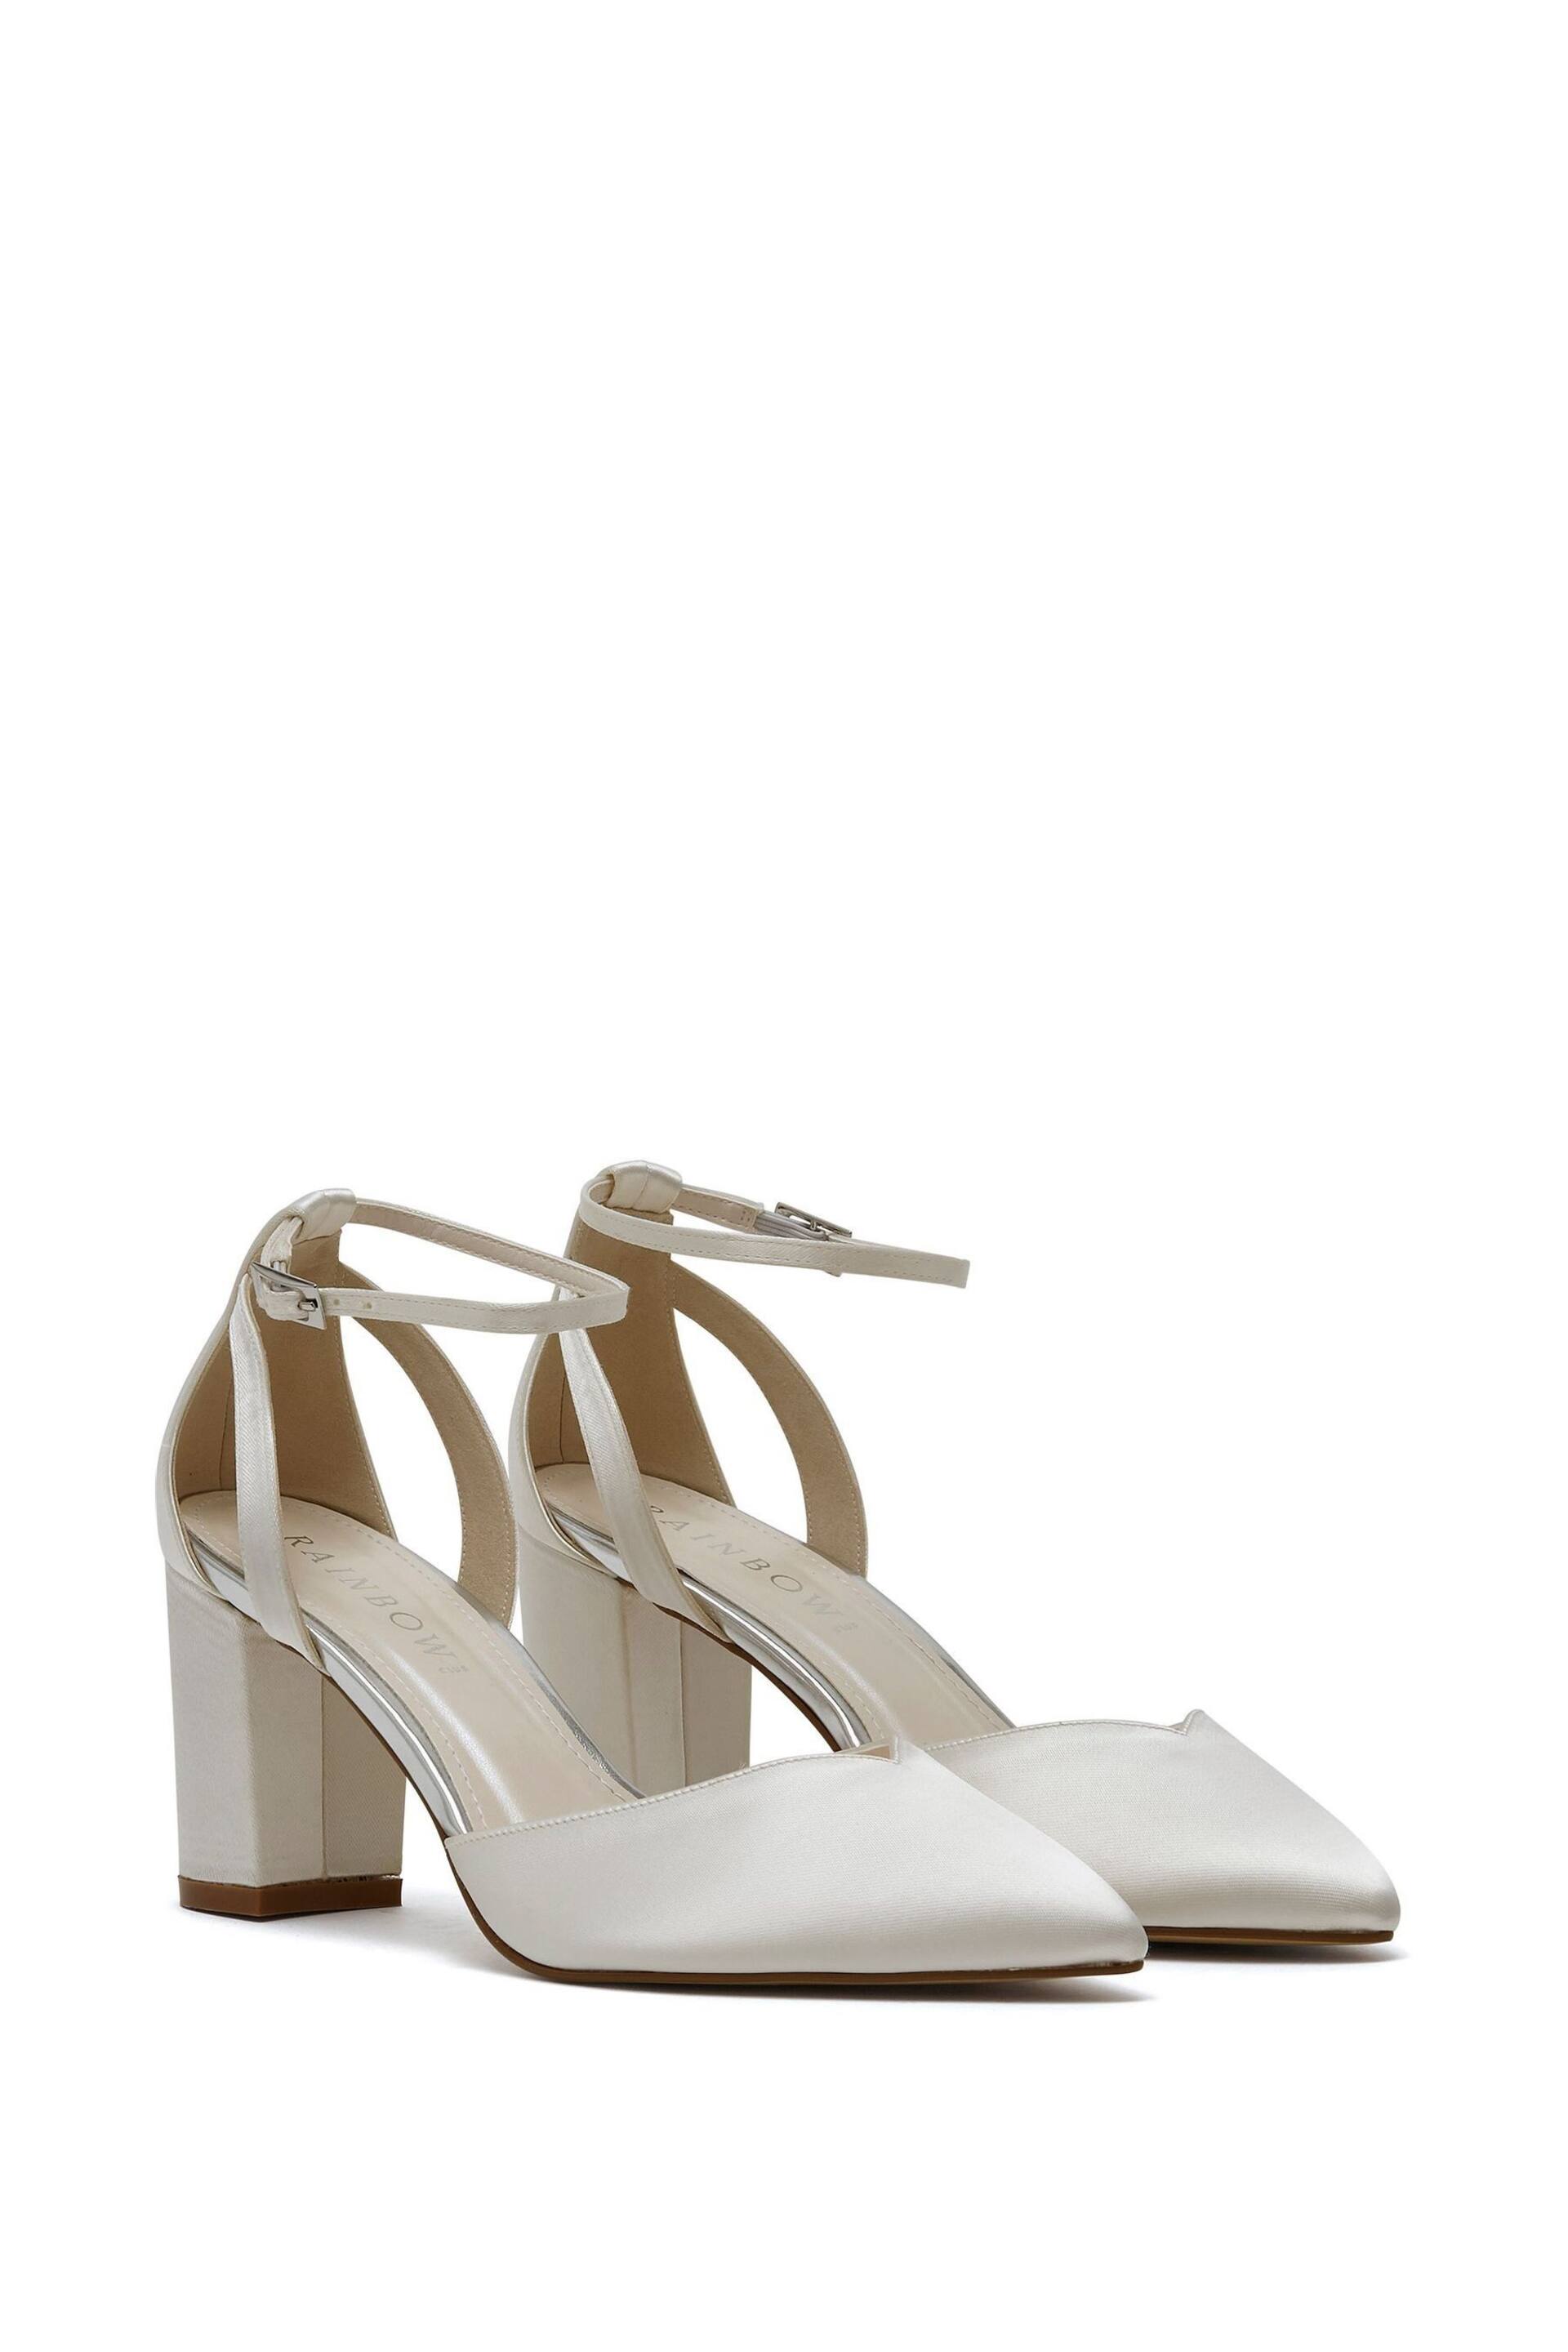 Rainbow Club Natural Bella Wide Fit Ivory Wedding Satin Shoes - Image 4 of 6